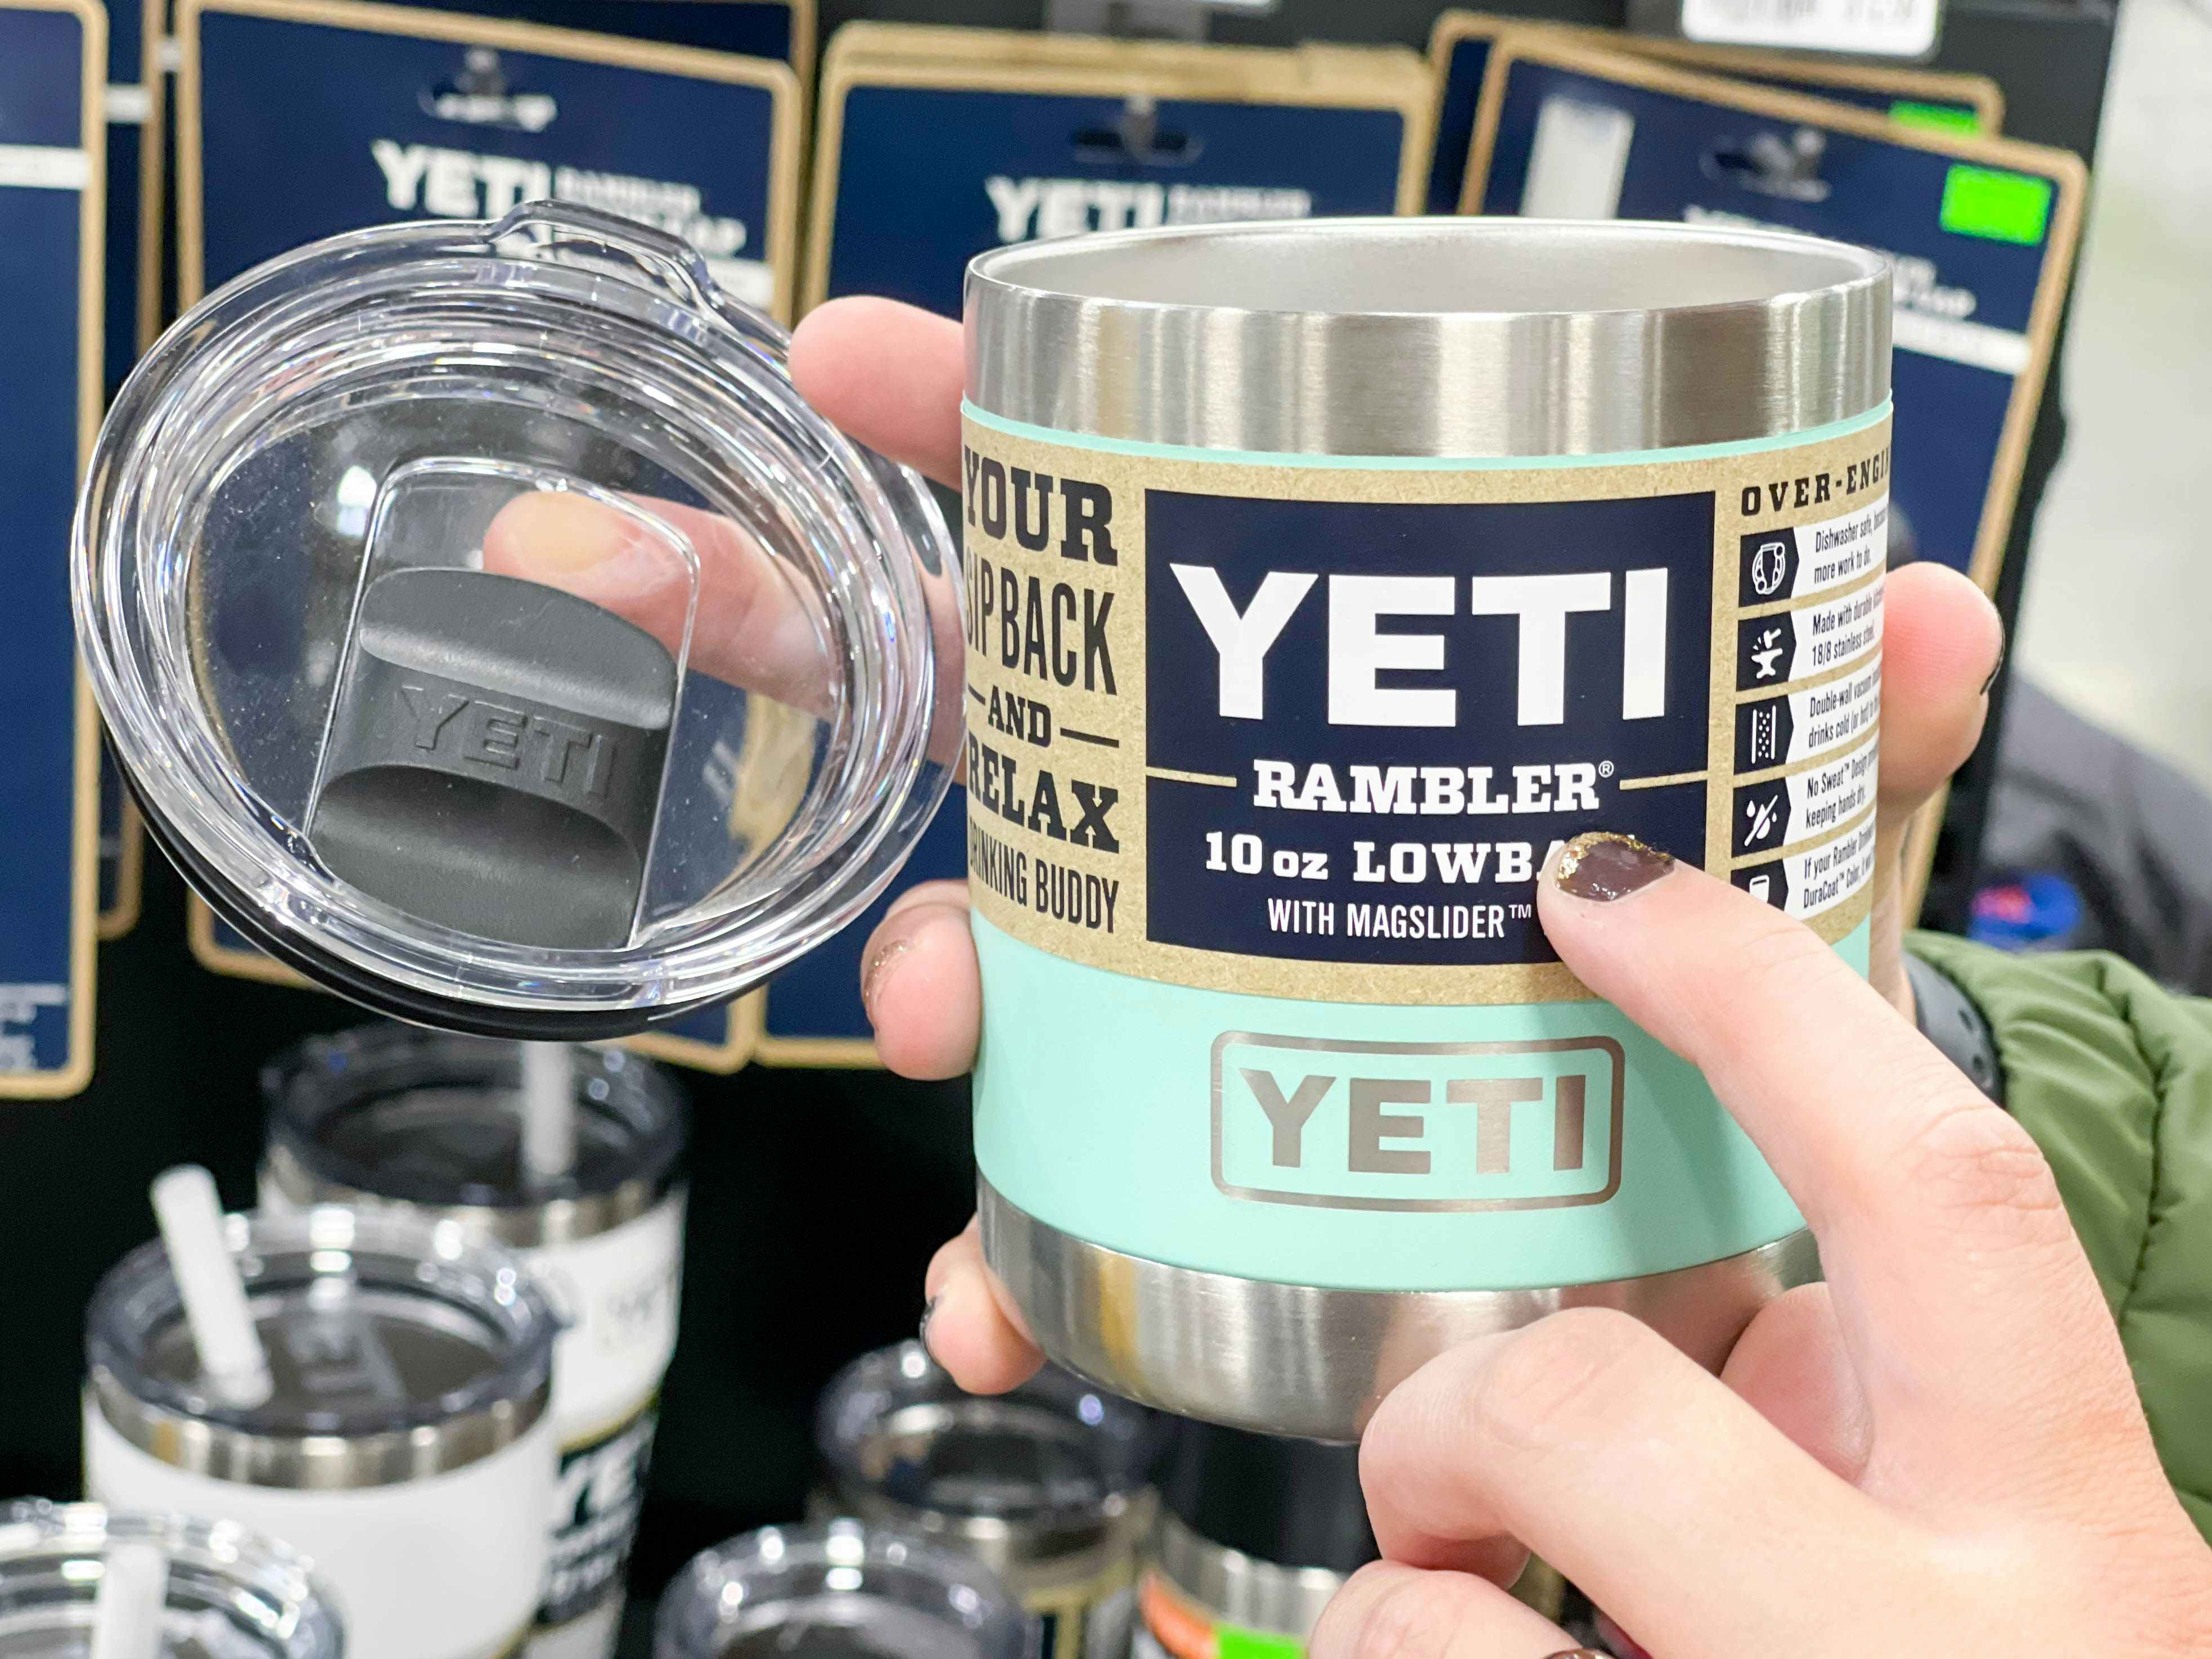 A person's hands holding up a YETI Rambler and lid, and pointing to the product label.